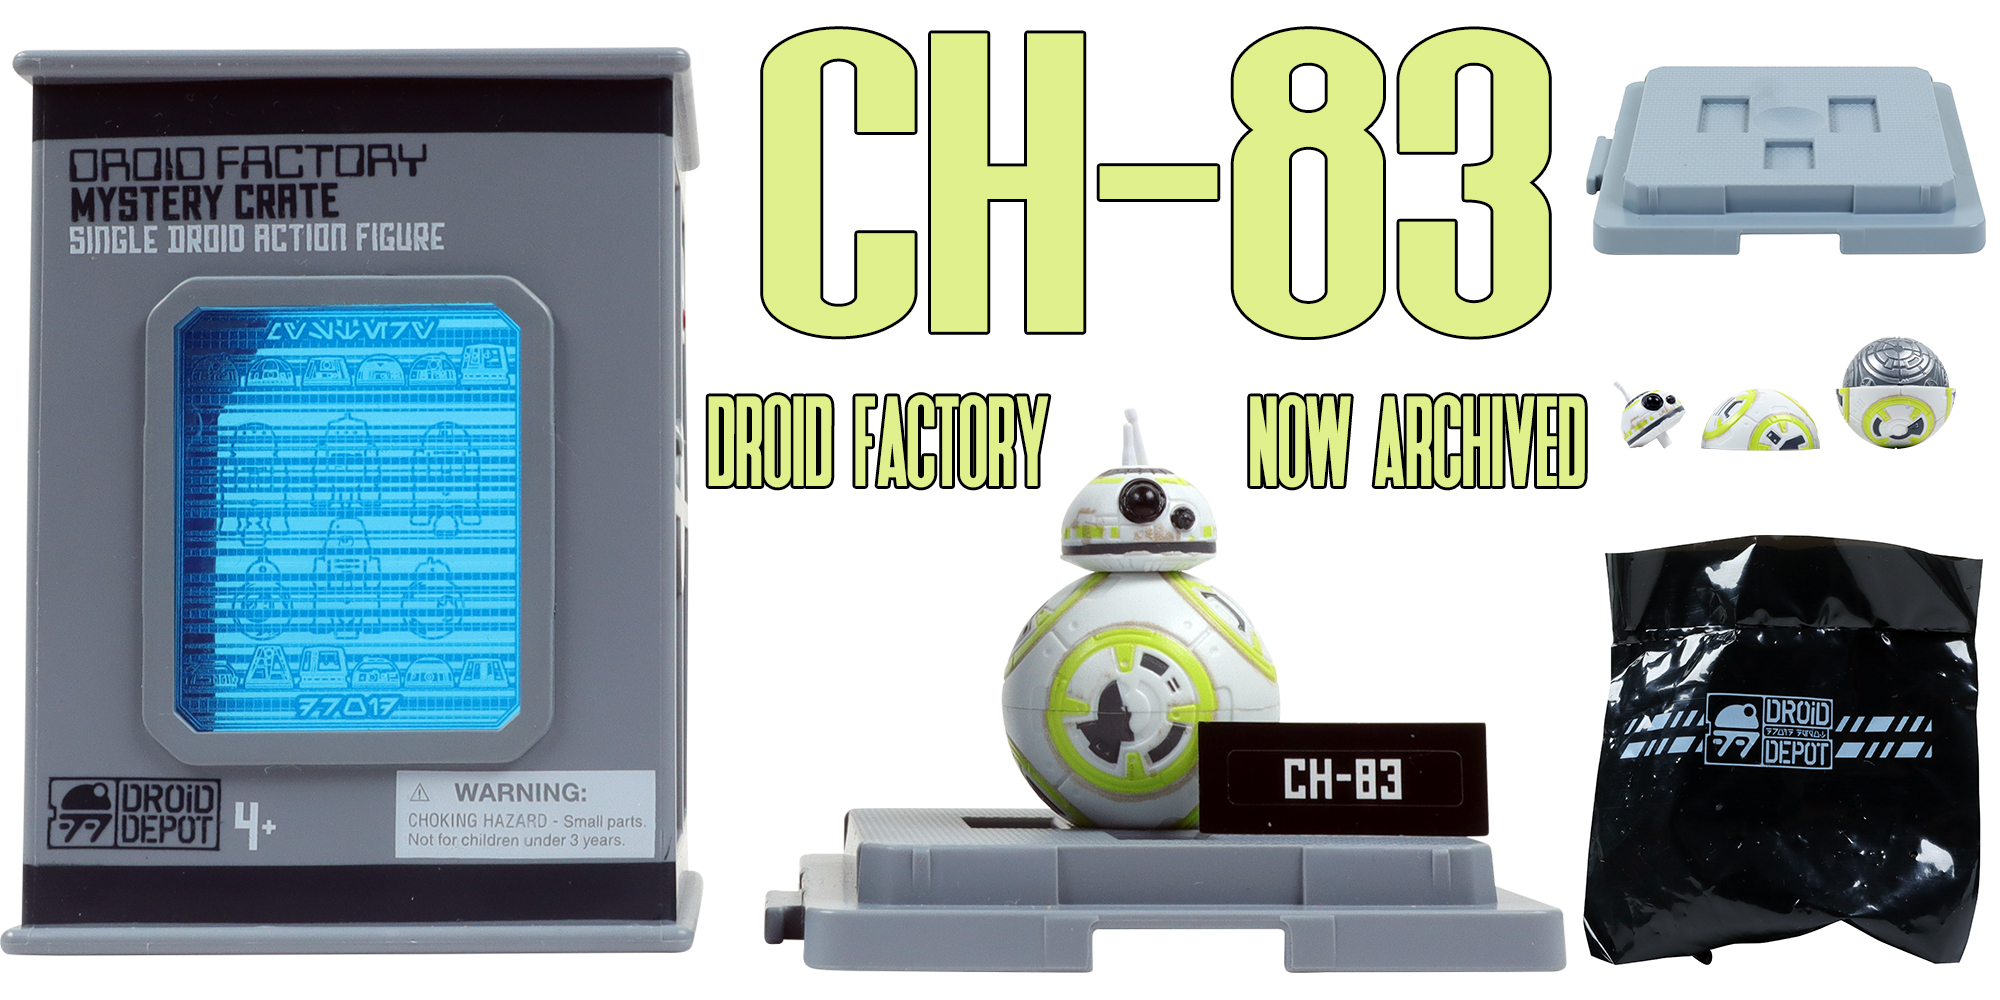 Disney's CH-83 BB-Unit Has Found Its Way Into The Database - Have A Look!